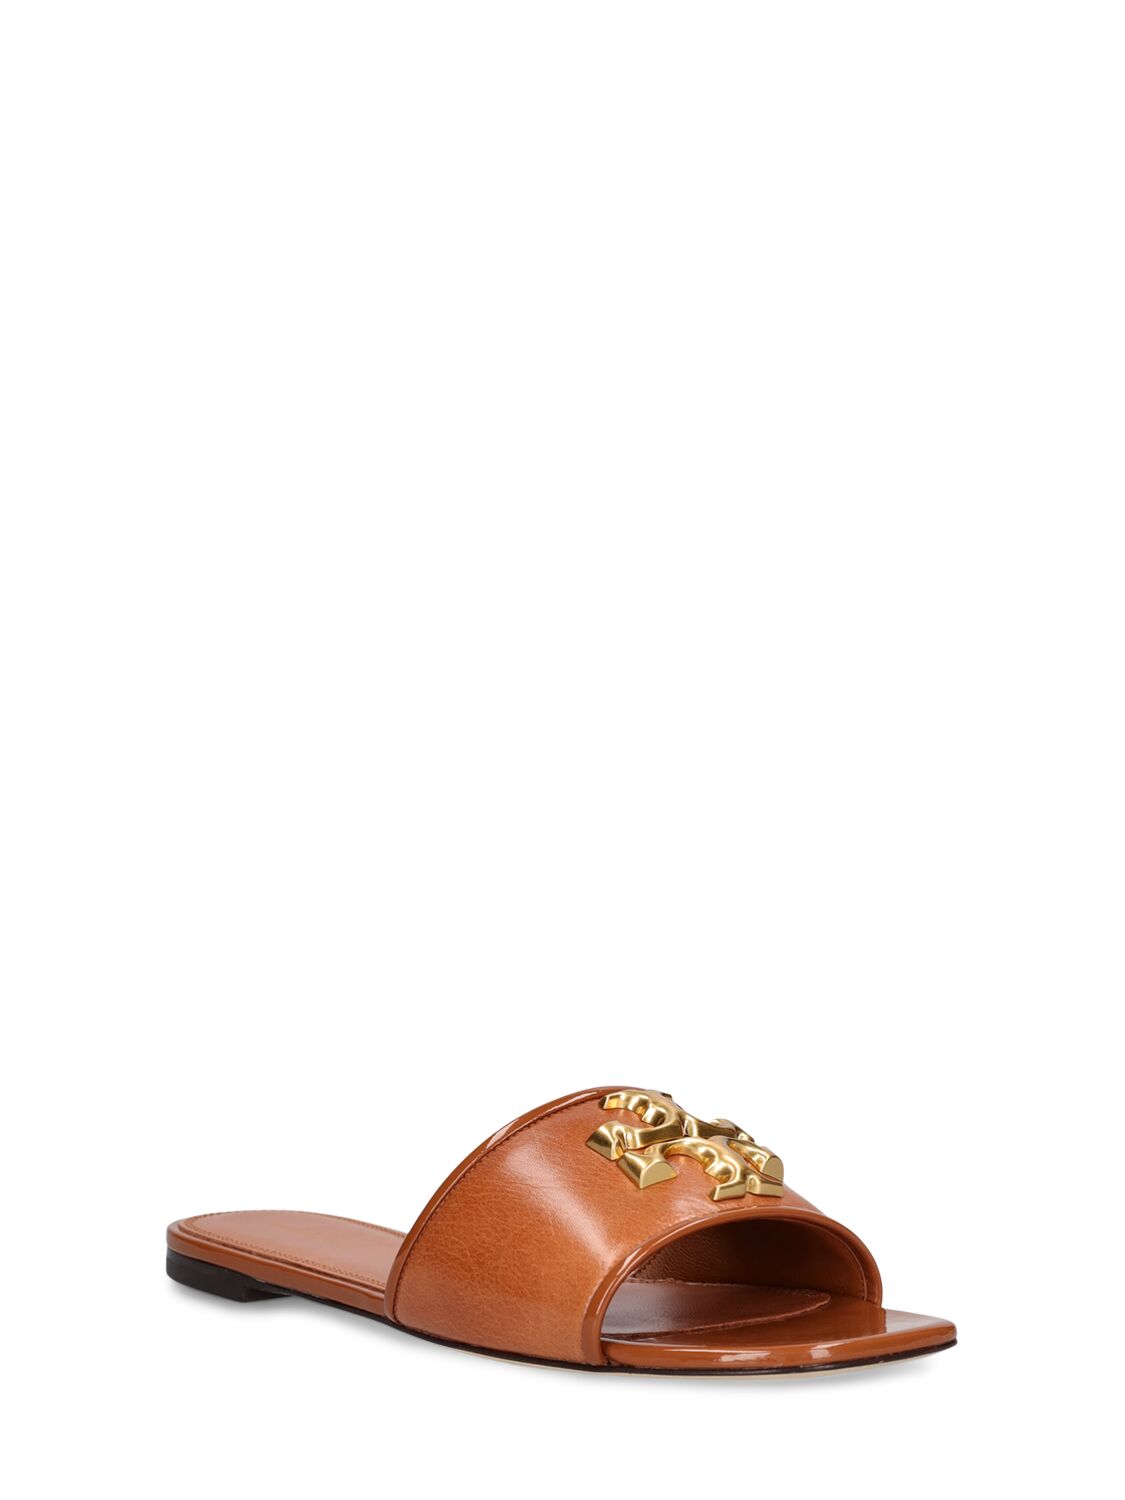 Shop Tory Burch 10mm Eleanor Leather Slide Sandals In Tan